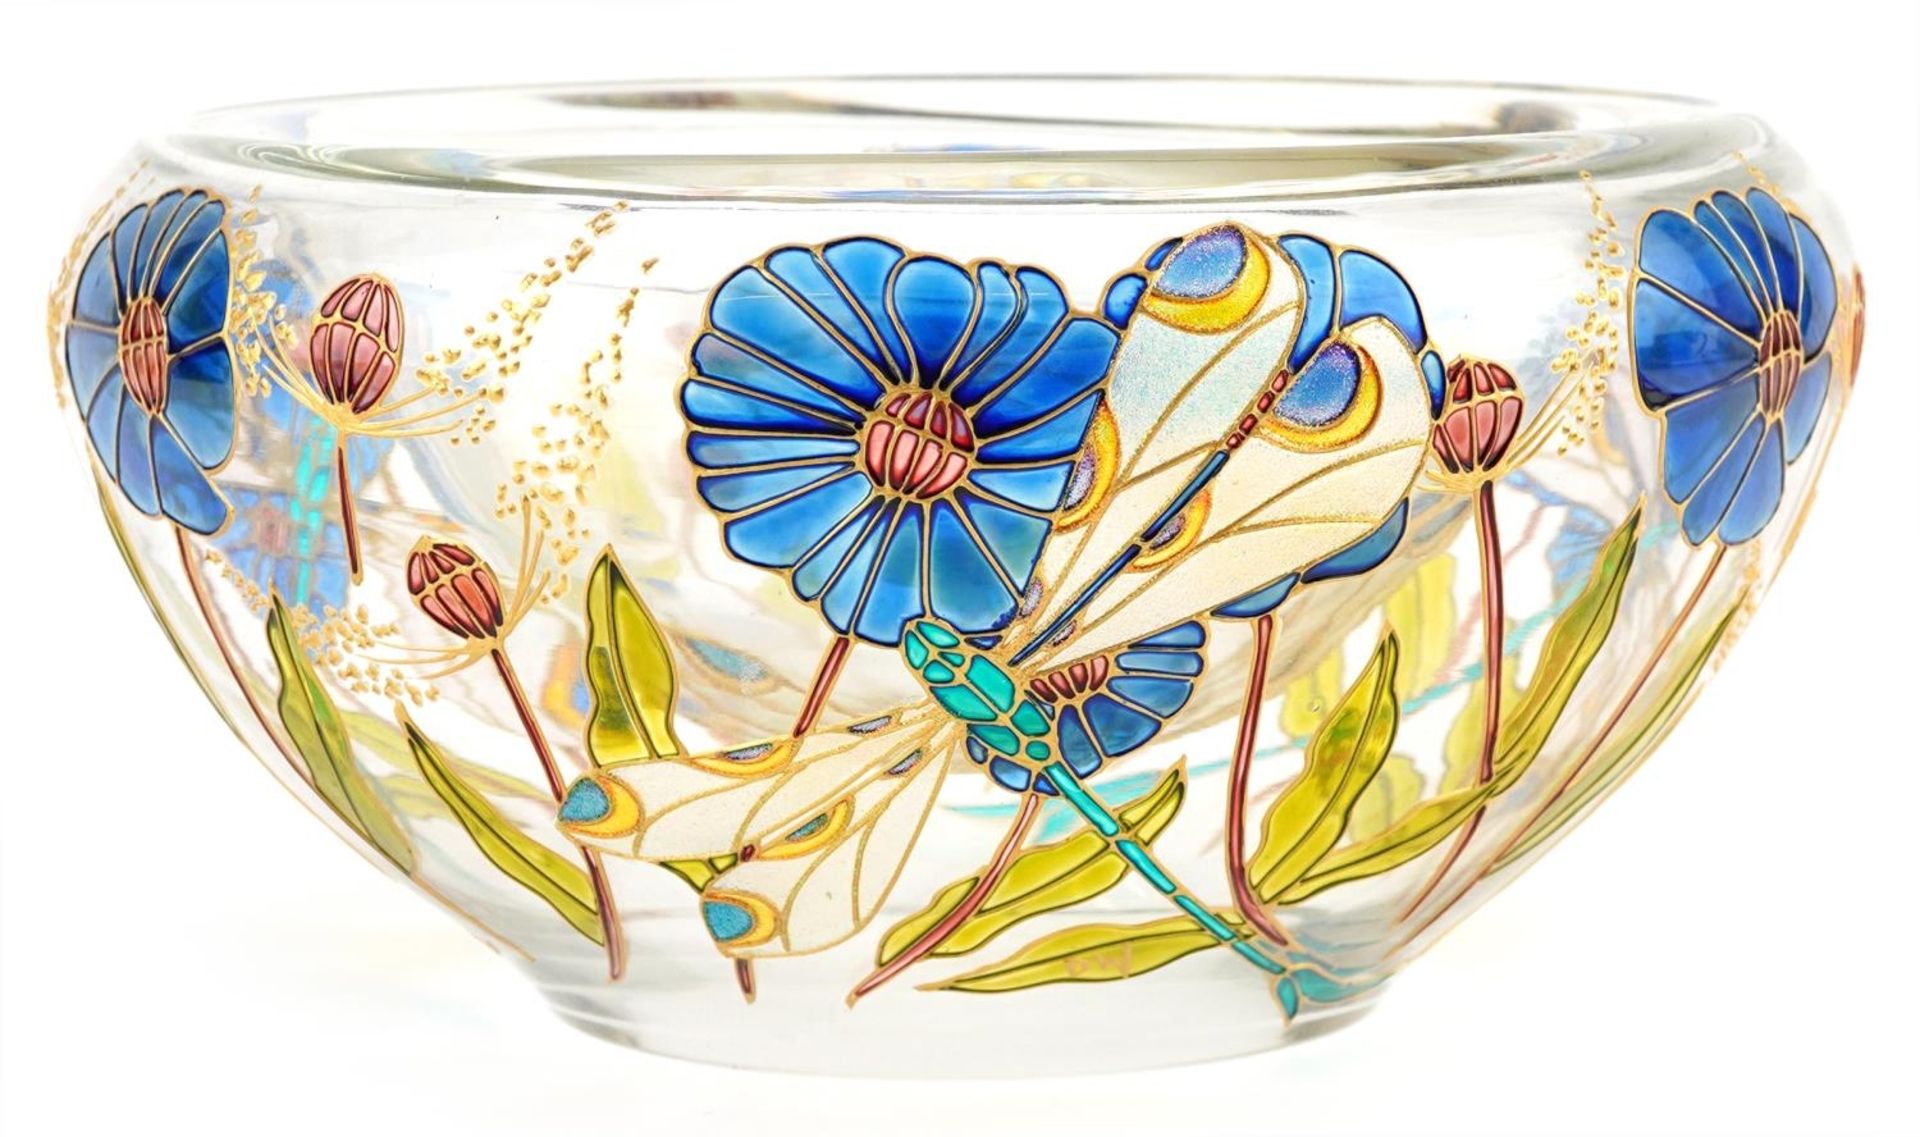 Double walled art glass bowl hand painted with dragonflies amongst flowers, 25.5cm in diameter